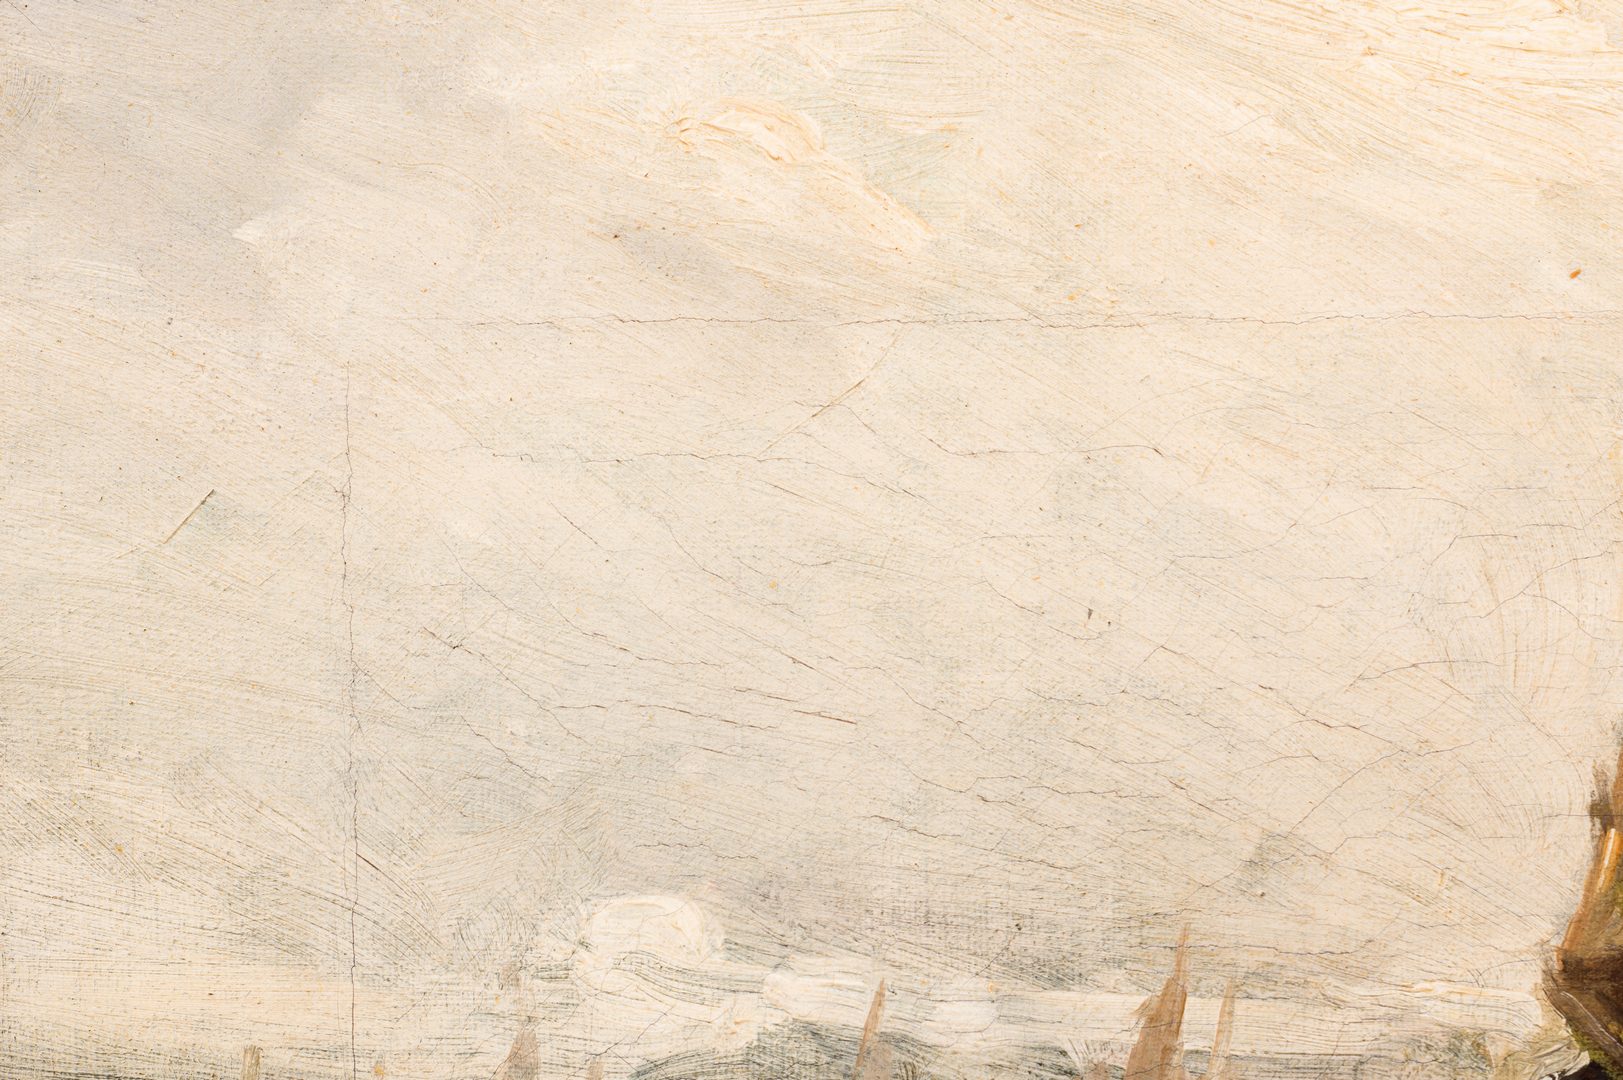 Lot 751: Harry (Henry) Chase Oil on Canvas Maritime Scene